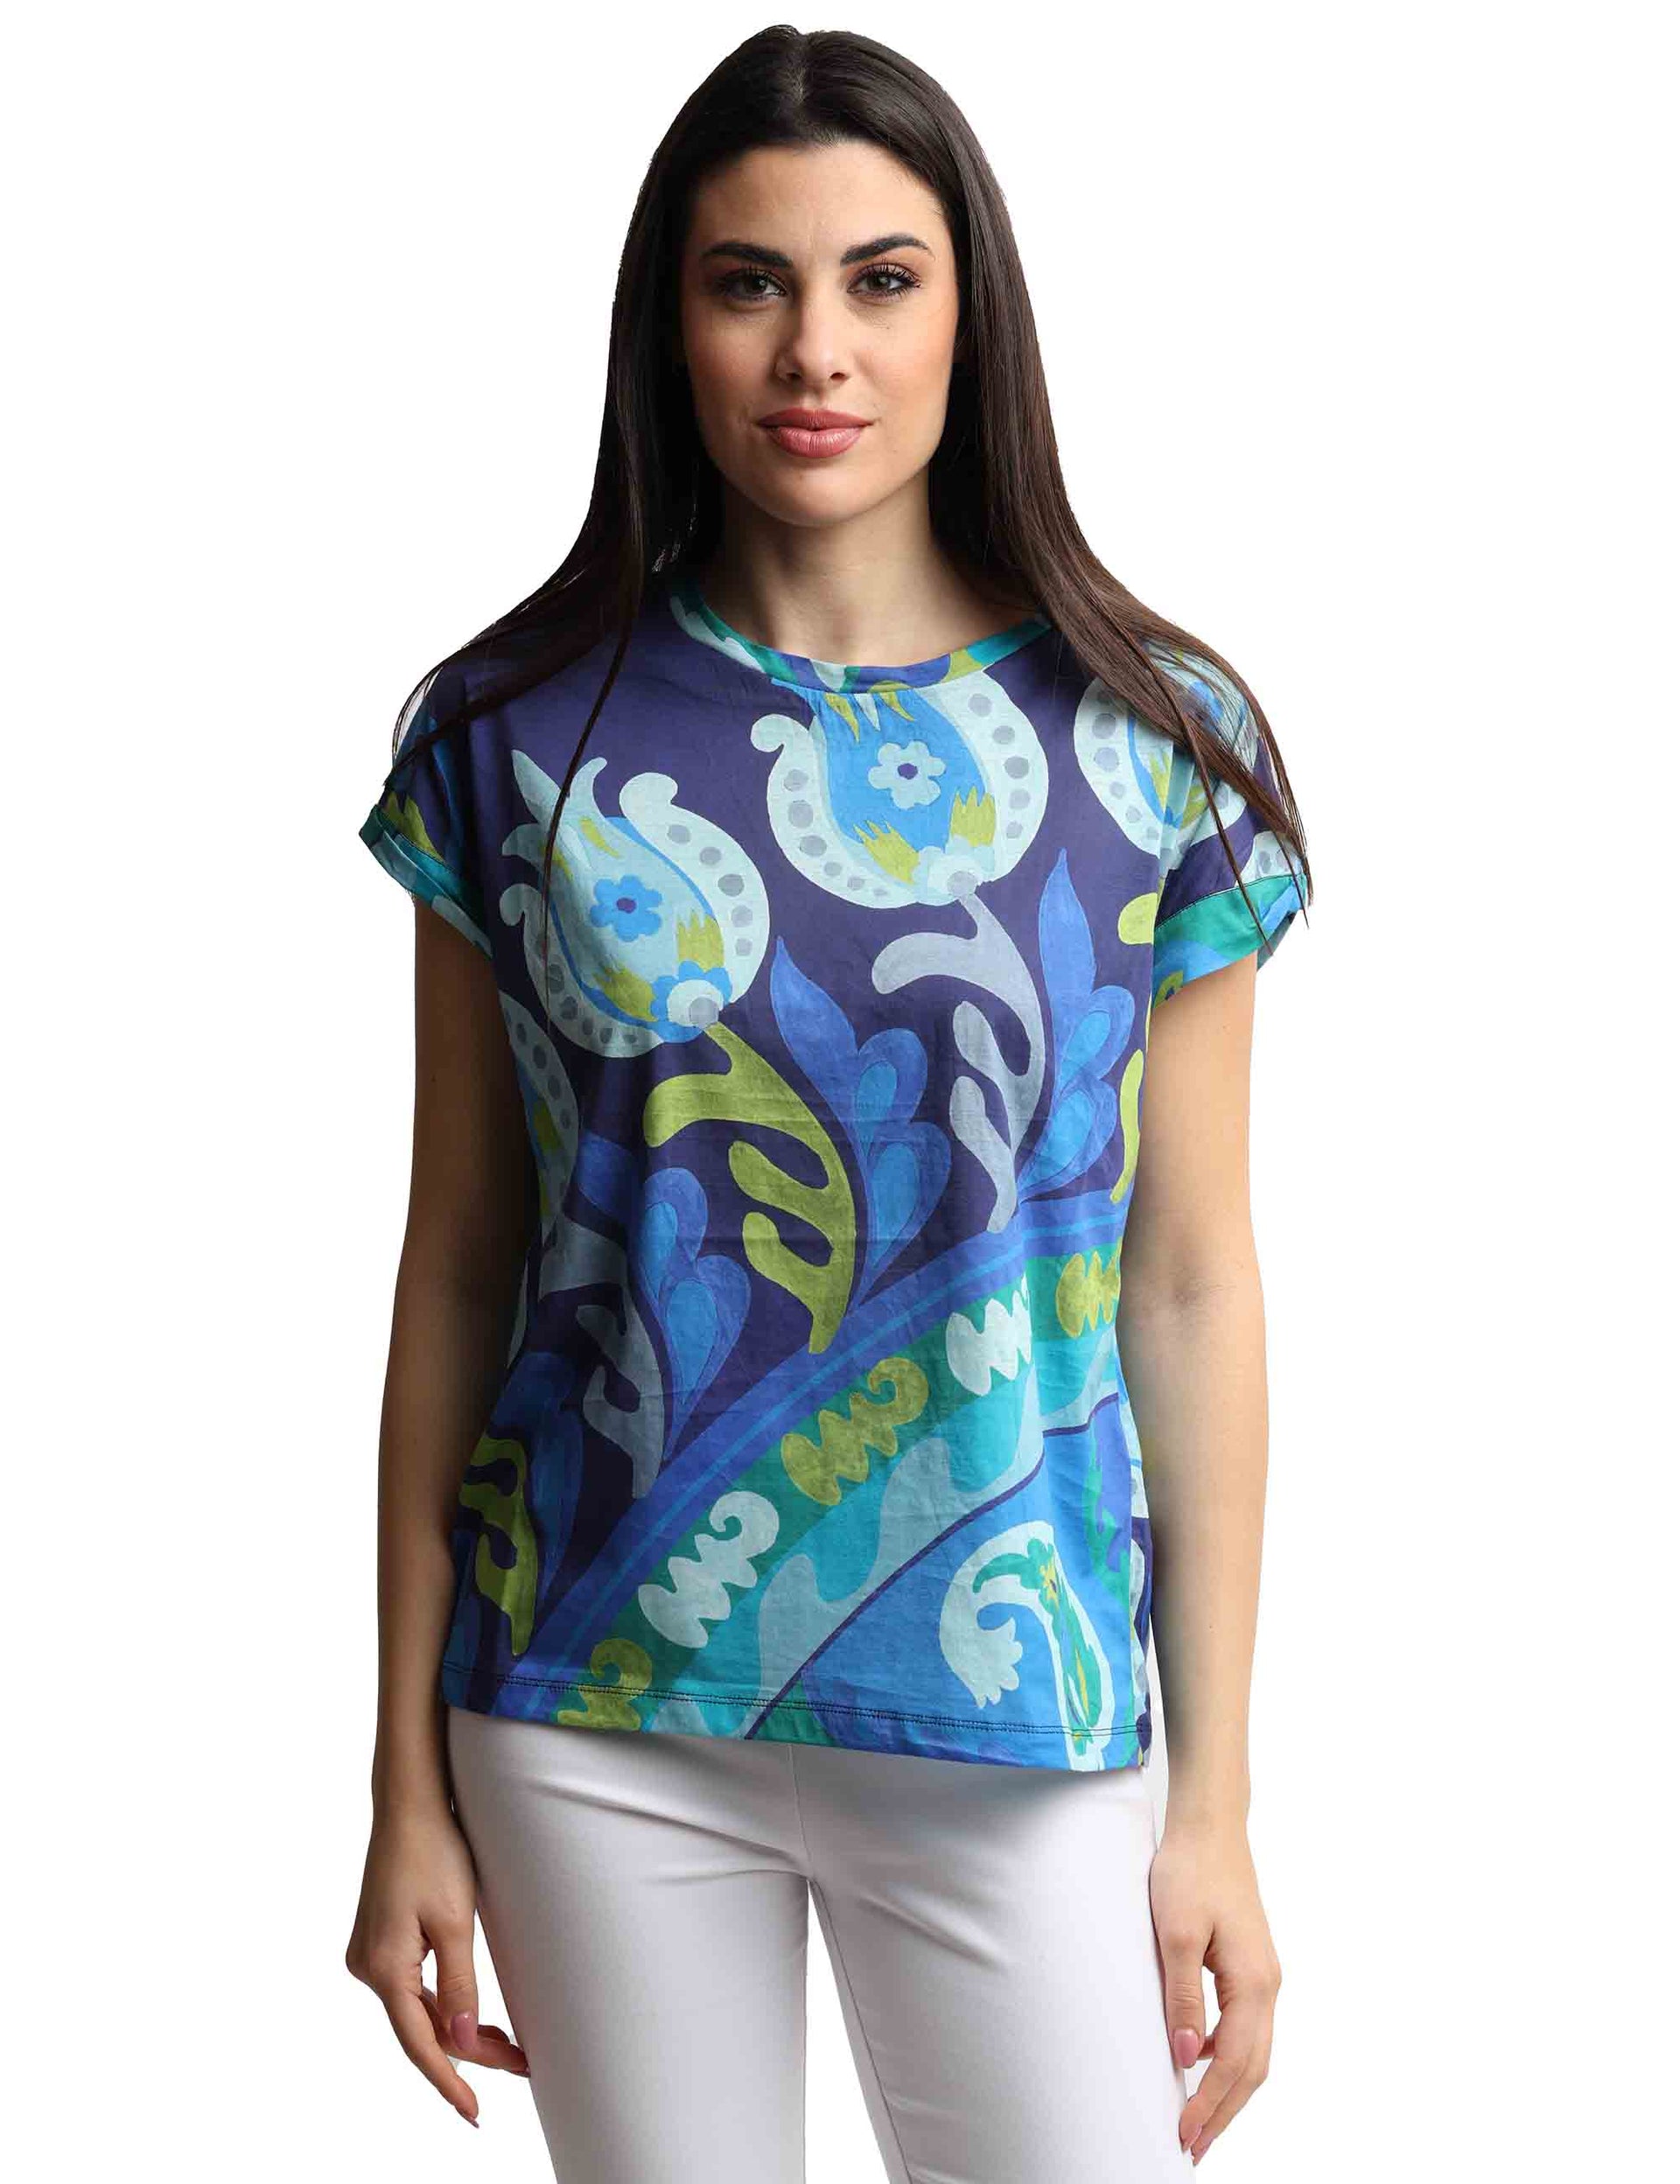 Fortuna's Prints women's t-shirts in patterned light blue cotton